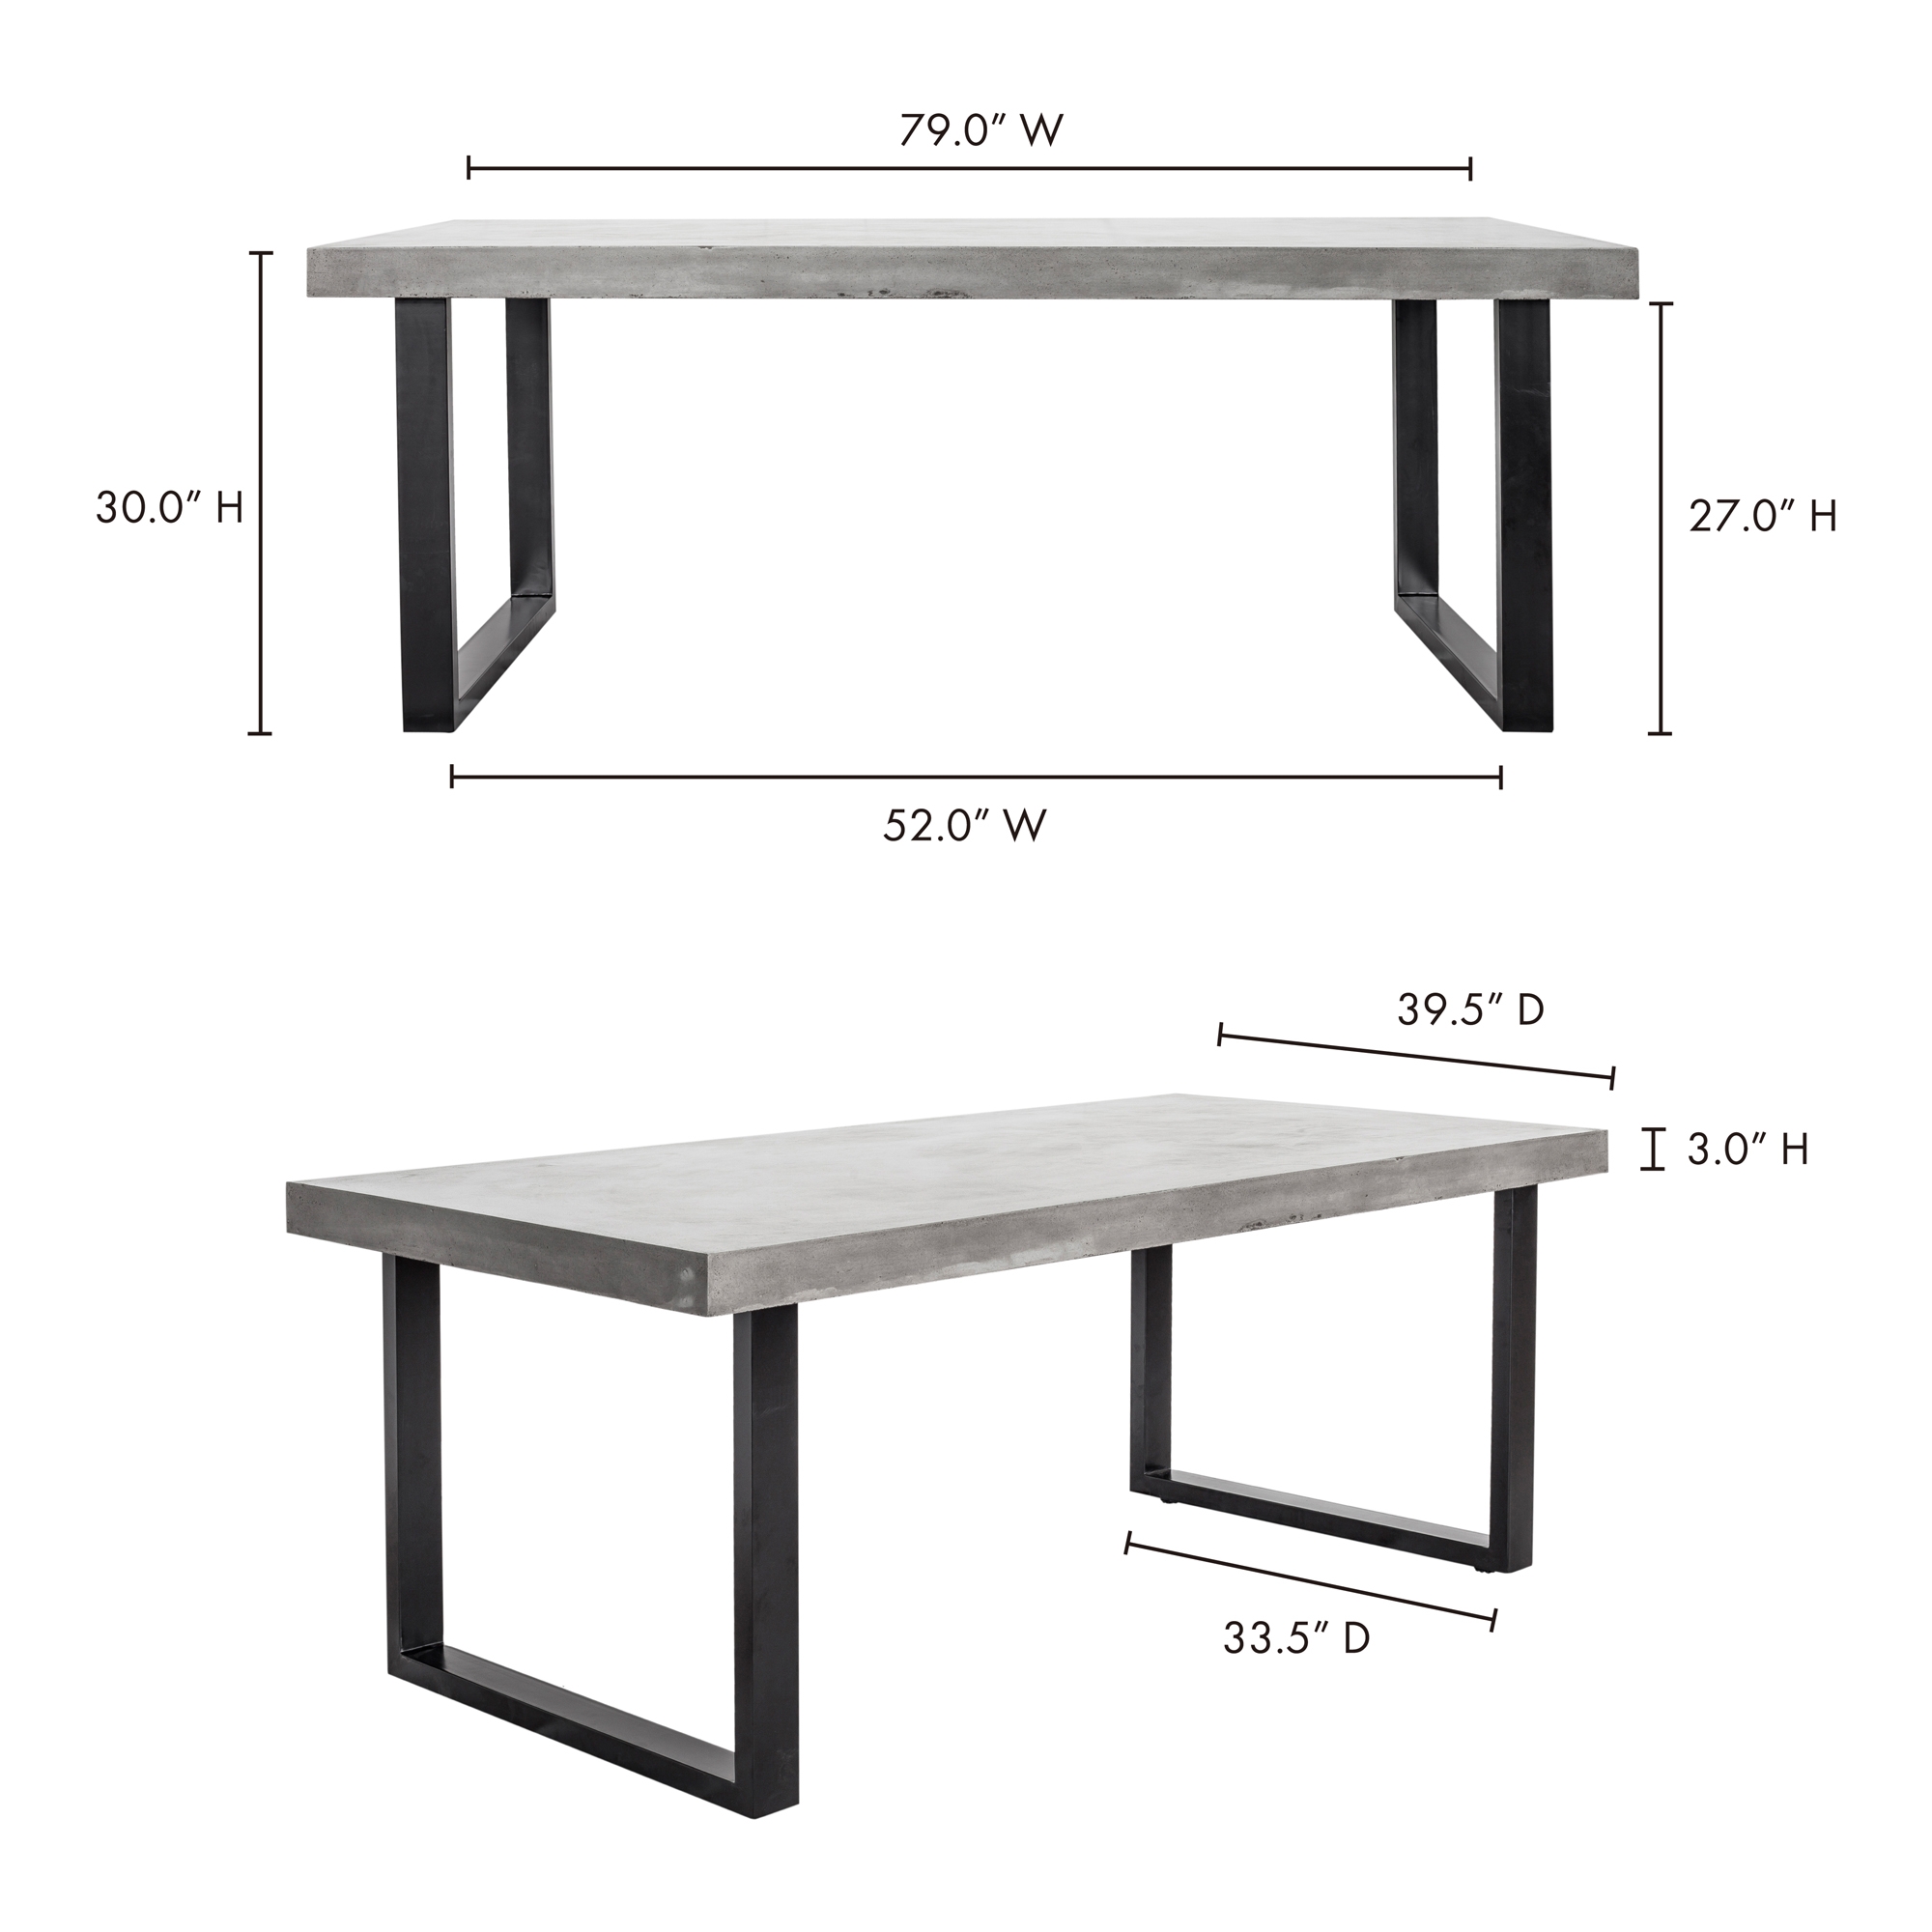 Jedrik Outdoor Dining Table Large - Image 6